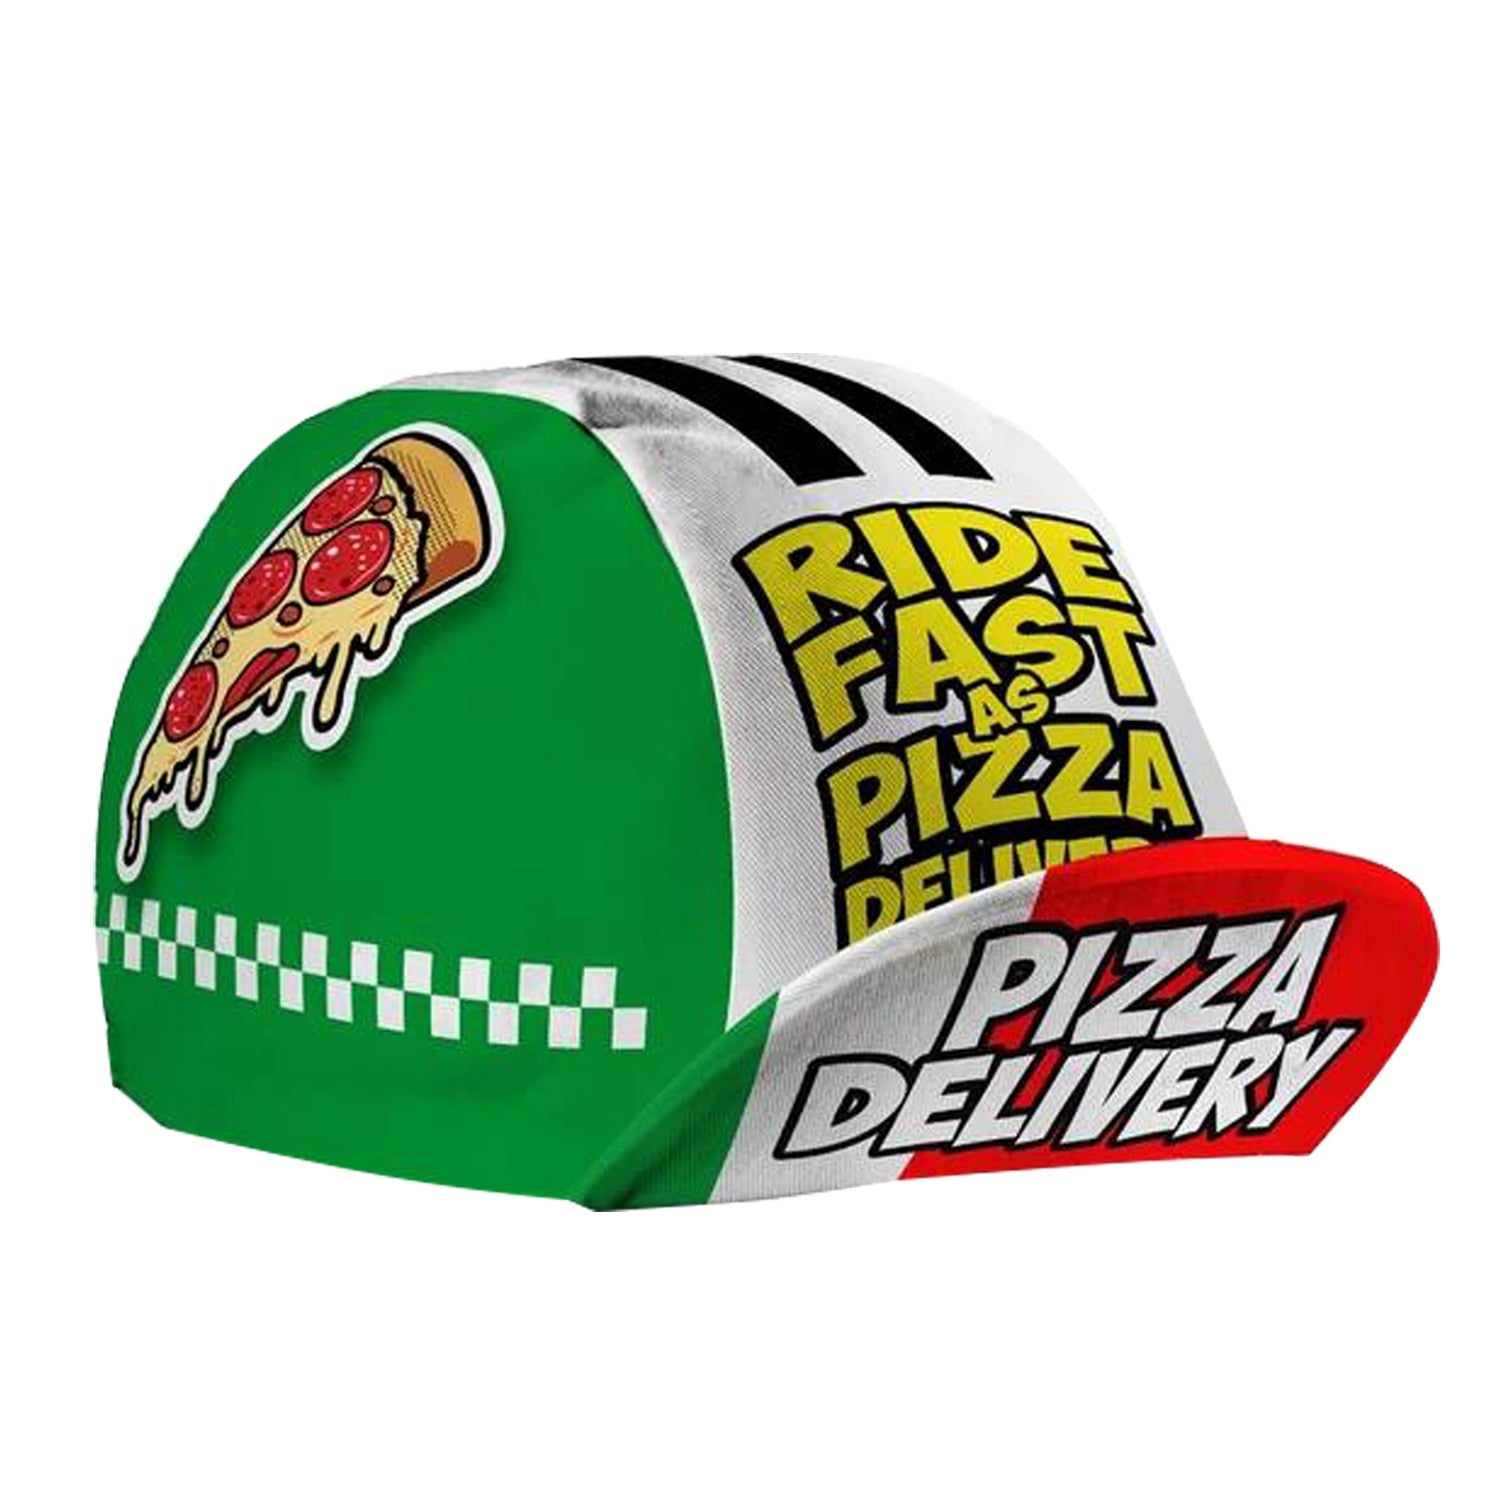 Classic Fashion Pizza Series Print Polyester Cycling Caps Green White Red Combination Quick Dry Bike Balaclava Customizable